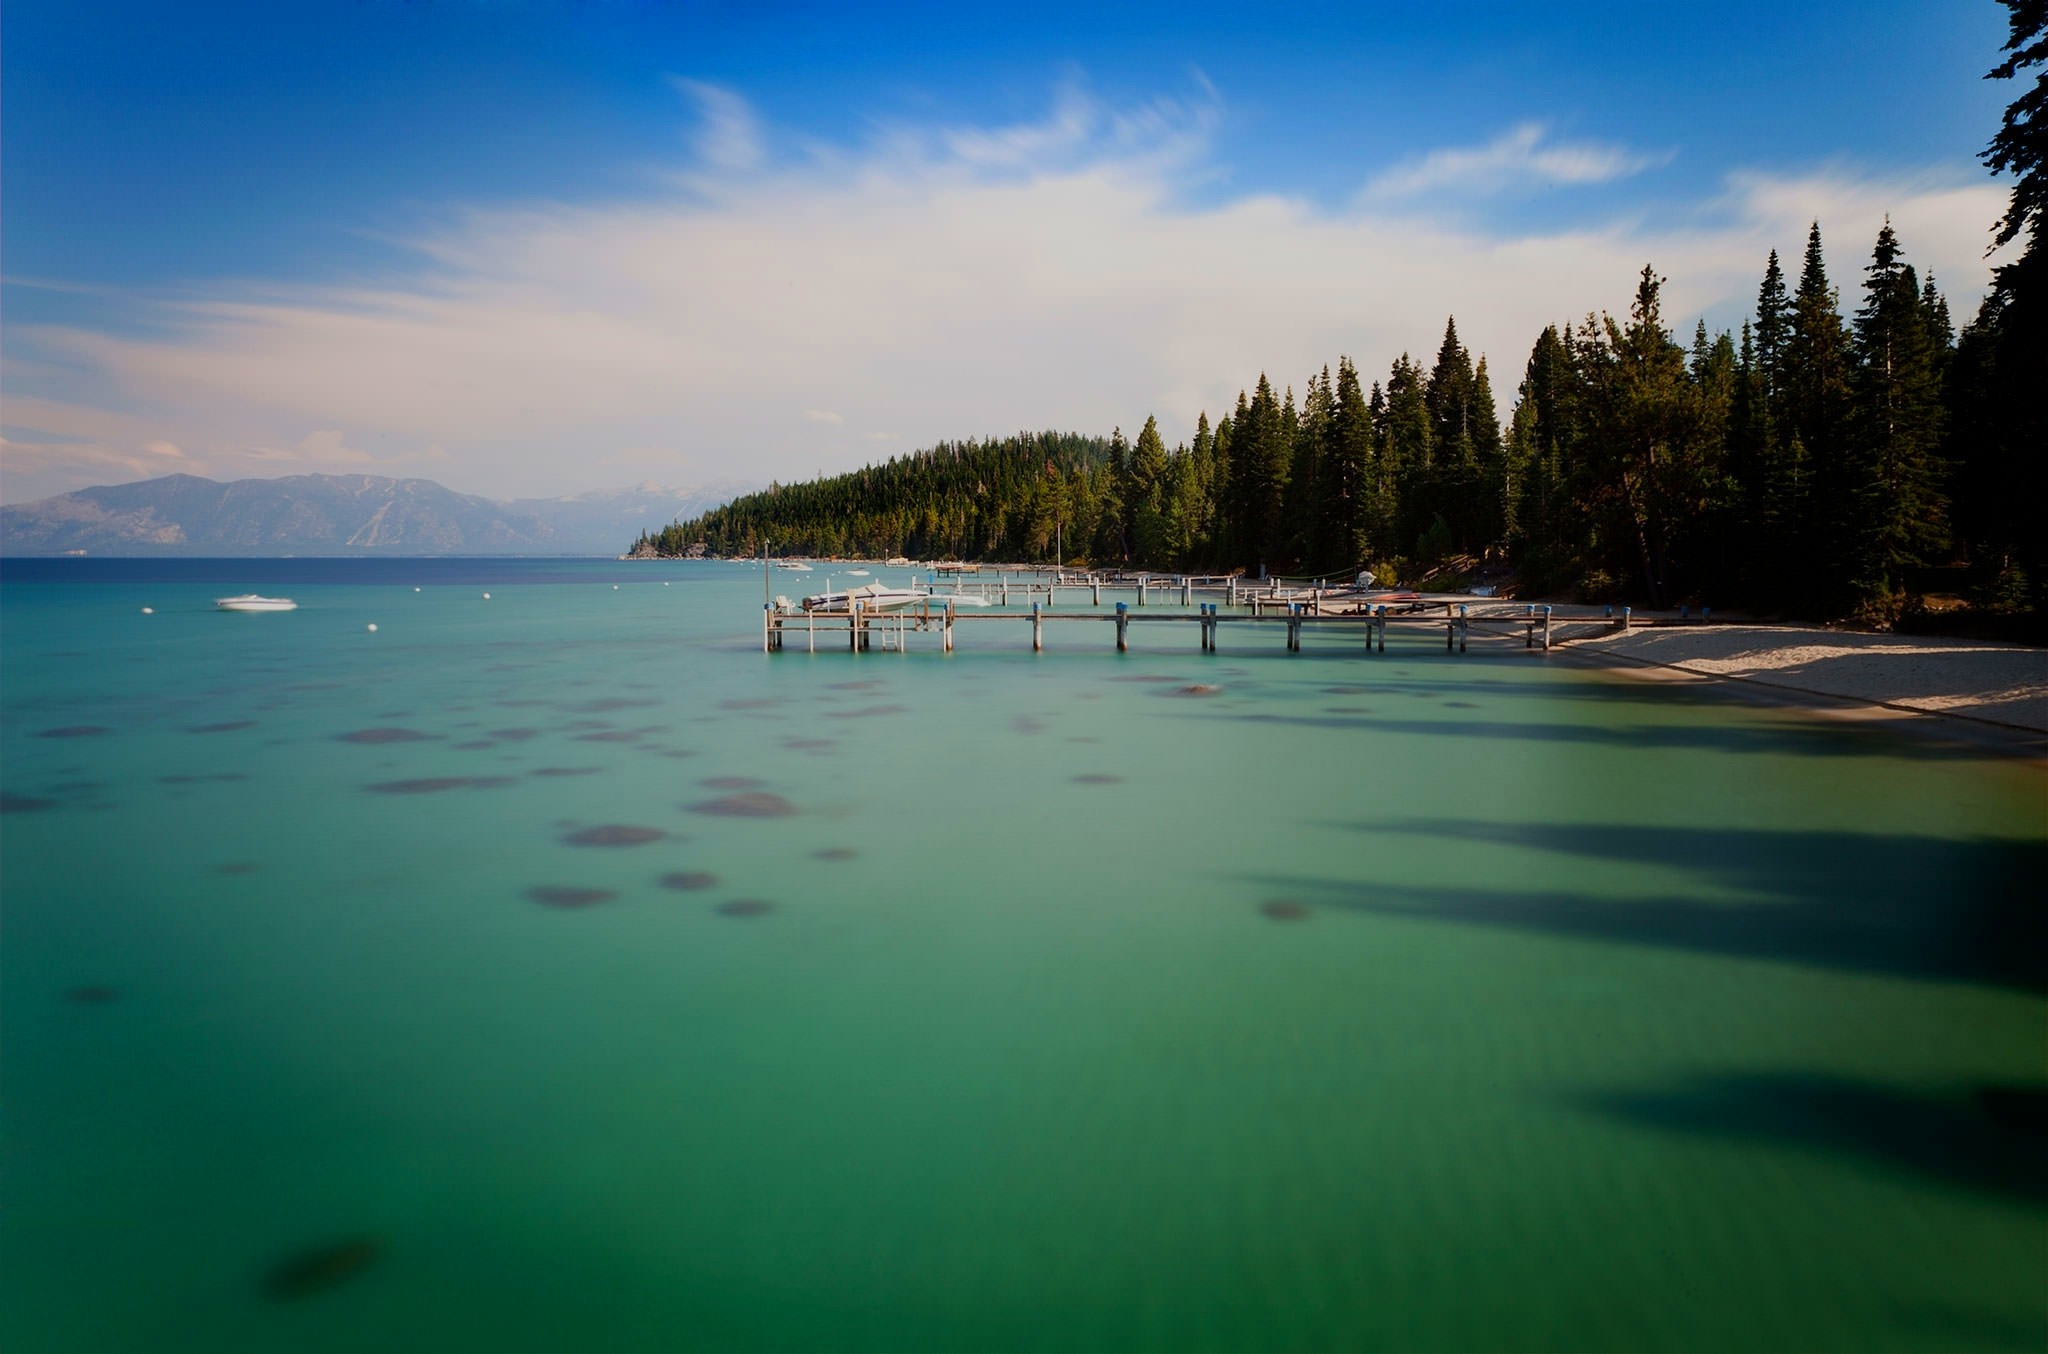 General 2048x1354 landscape photography nature pier Lake Tahoe forest water sky